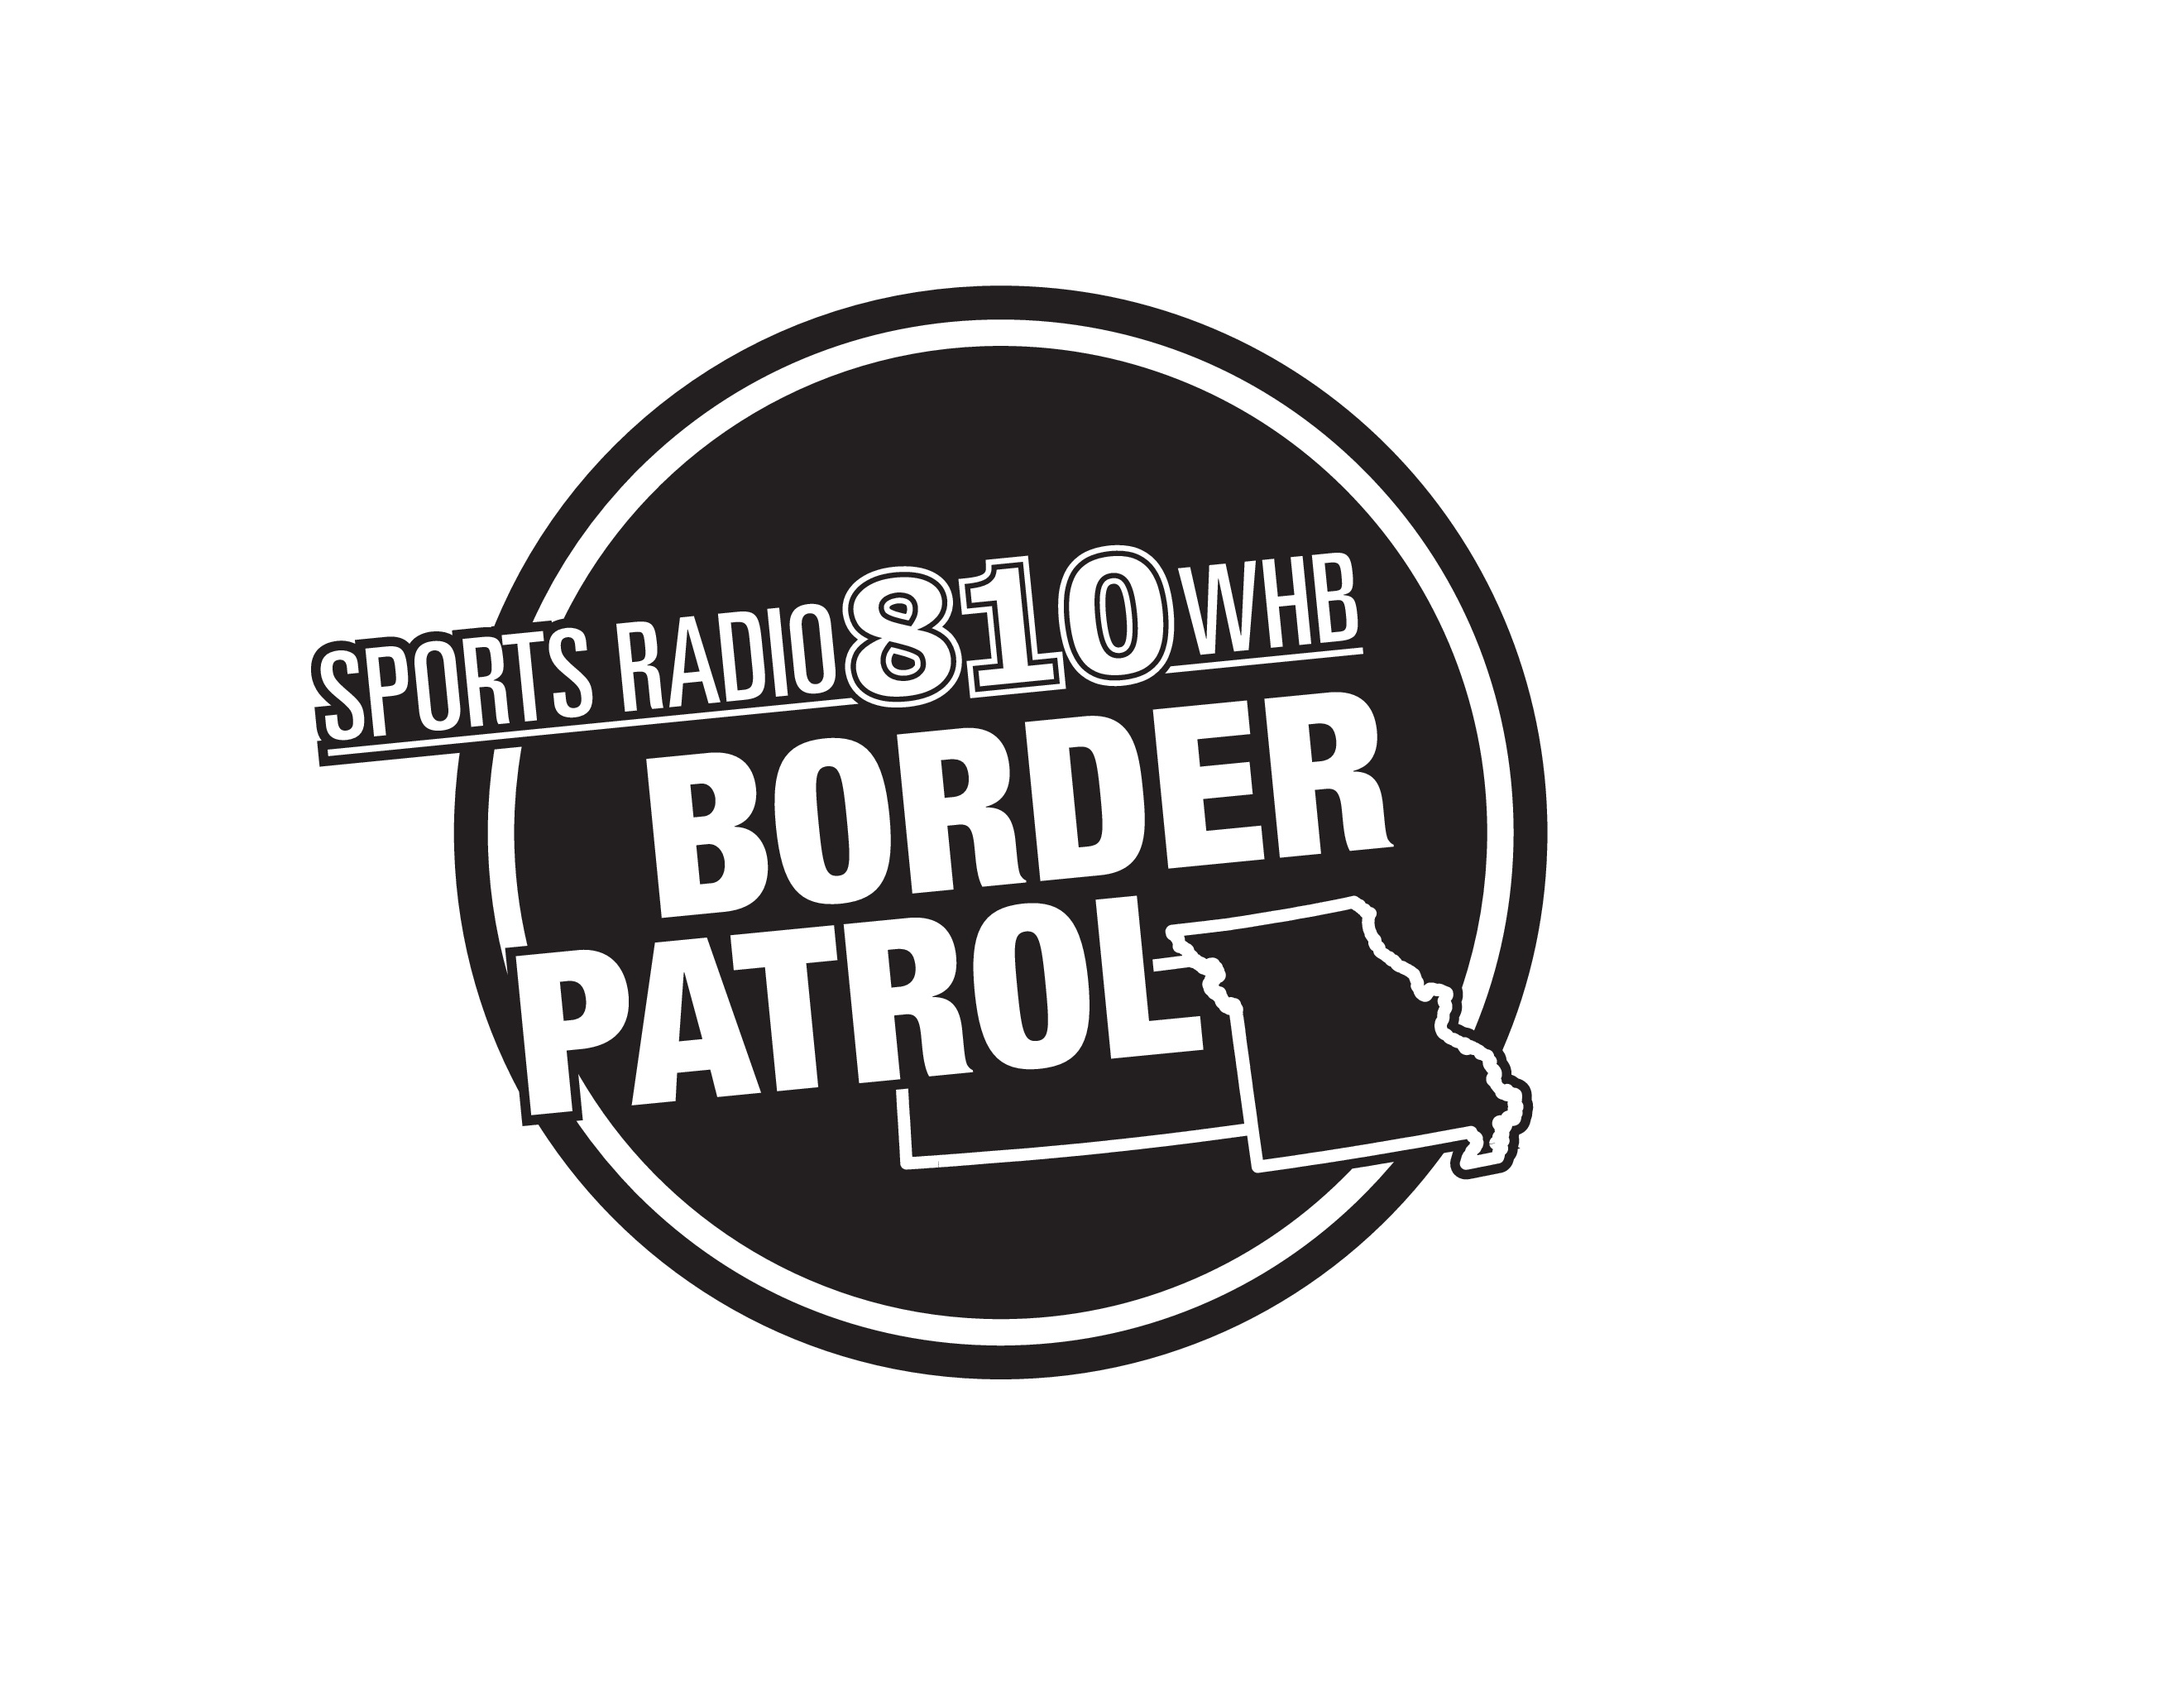 10-5-22 HR 1 of The Border Patrol on 38 The Spot